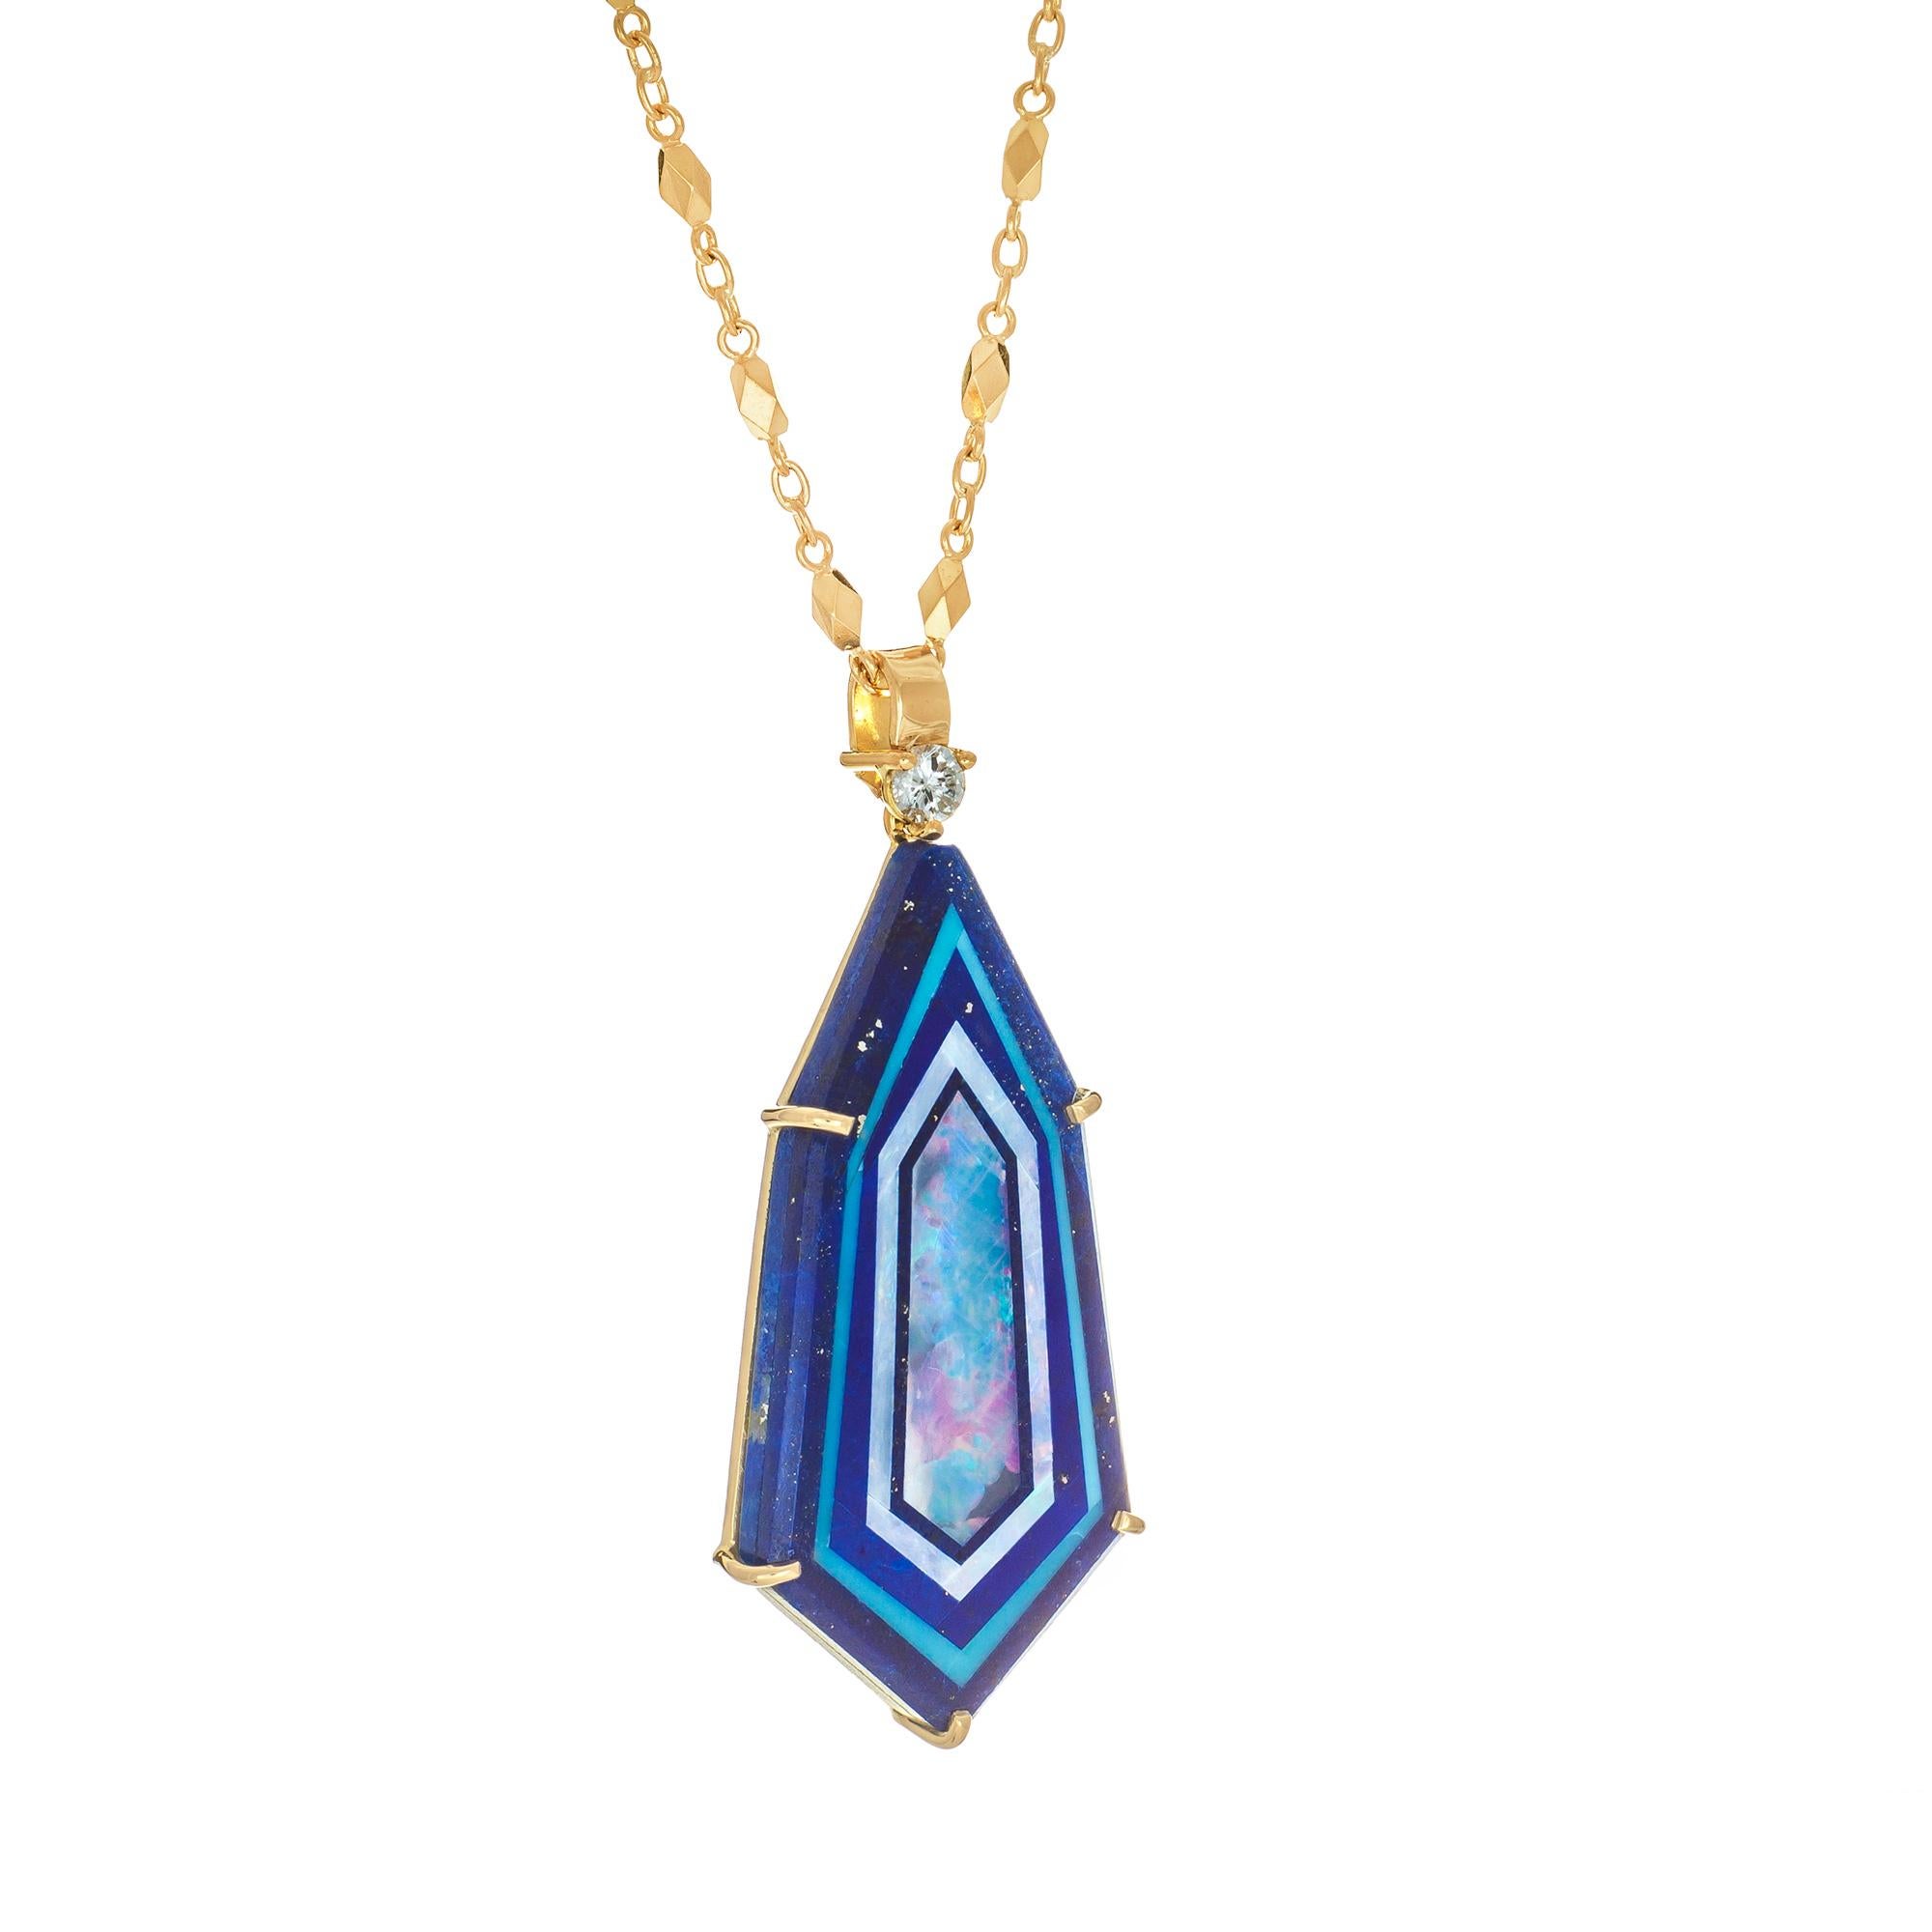 Signed James Kaufman, Multi-stone Inlay of all natural lapis, turquoise and opal inlay, with one round accent diamond, set in 18k yellow gold pendant and necklace.

1 multi stone lapis, turquoise, opal inlay 
1 round brilliant cut diamond I SI,